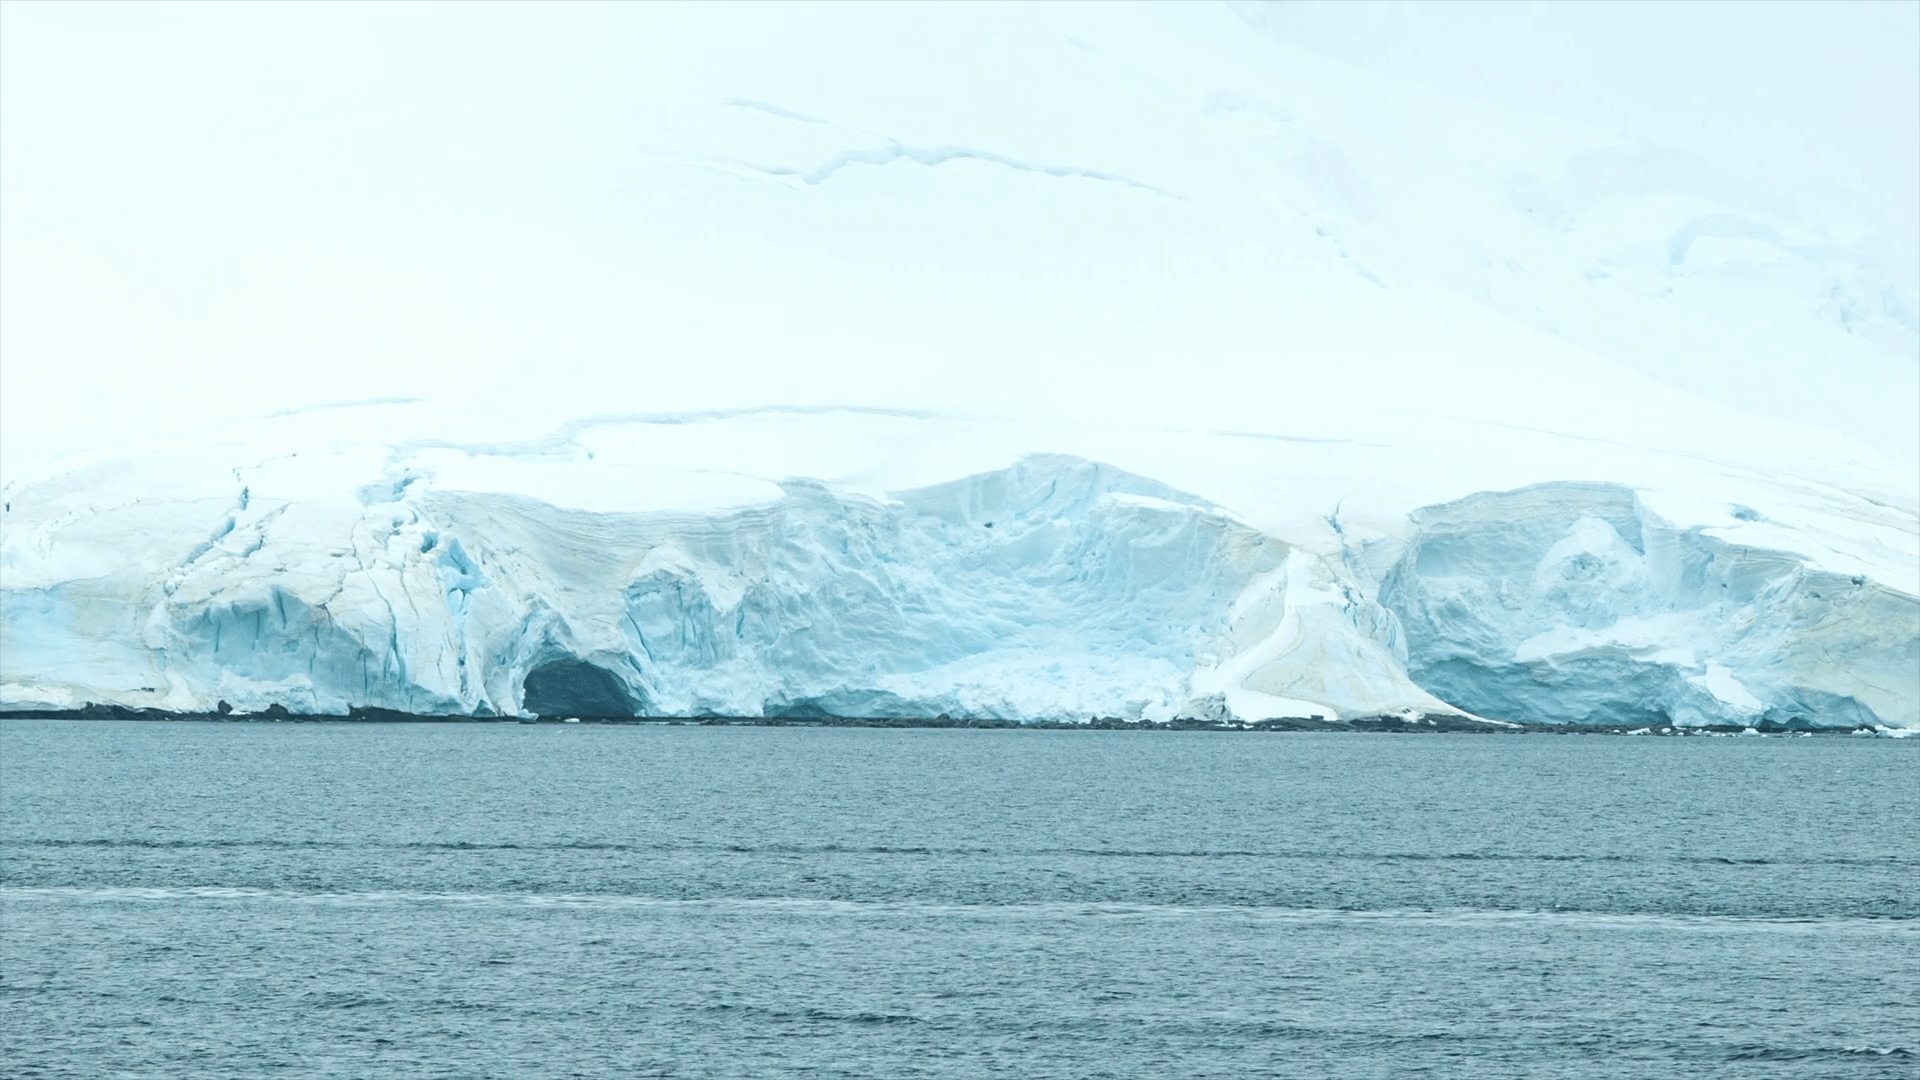 Ice Glaciers in Paradise Bay Antarctica Seen from a Moving Ship